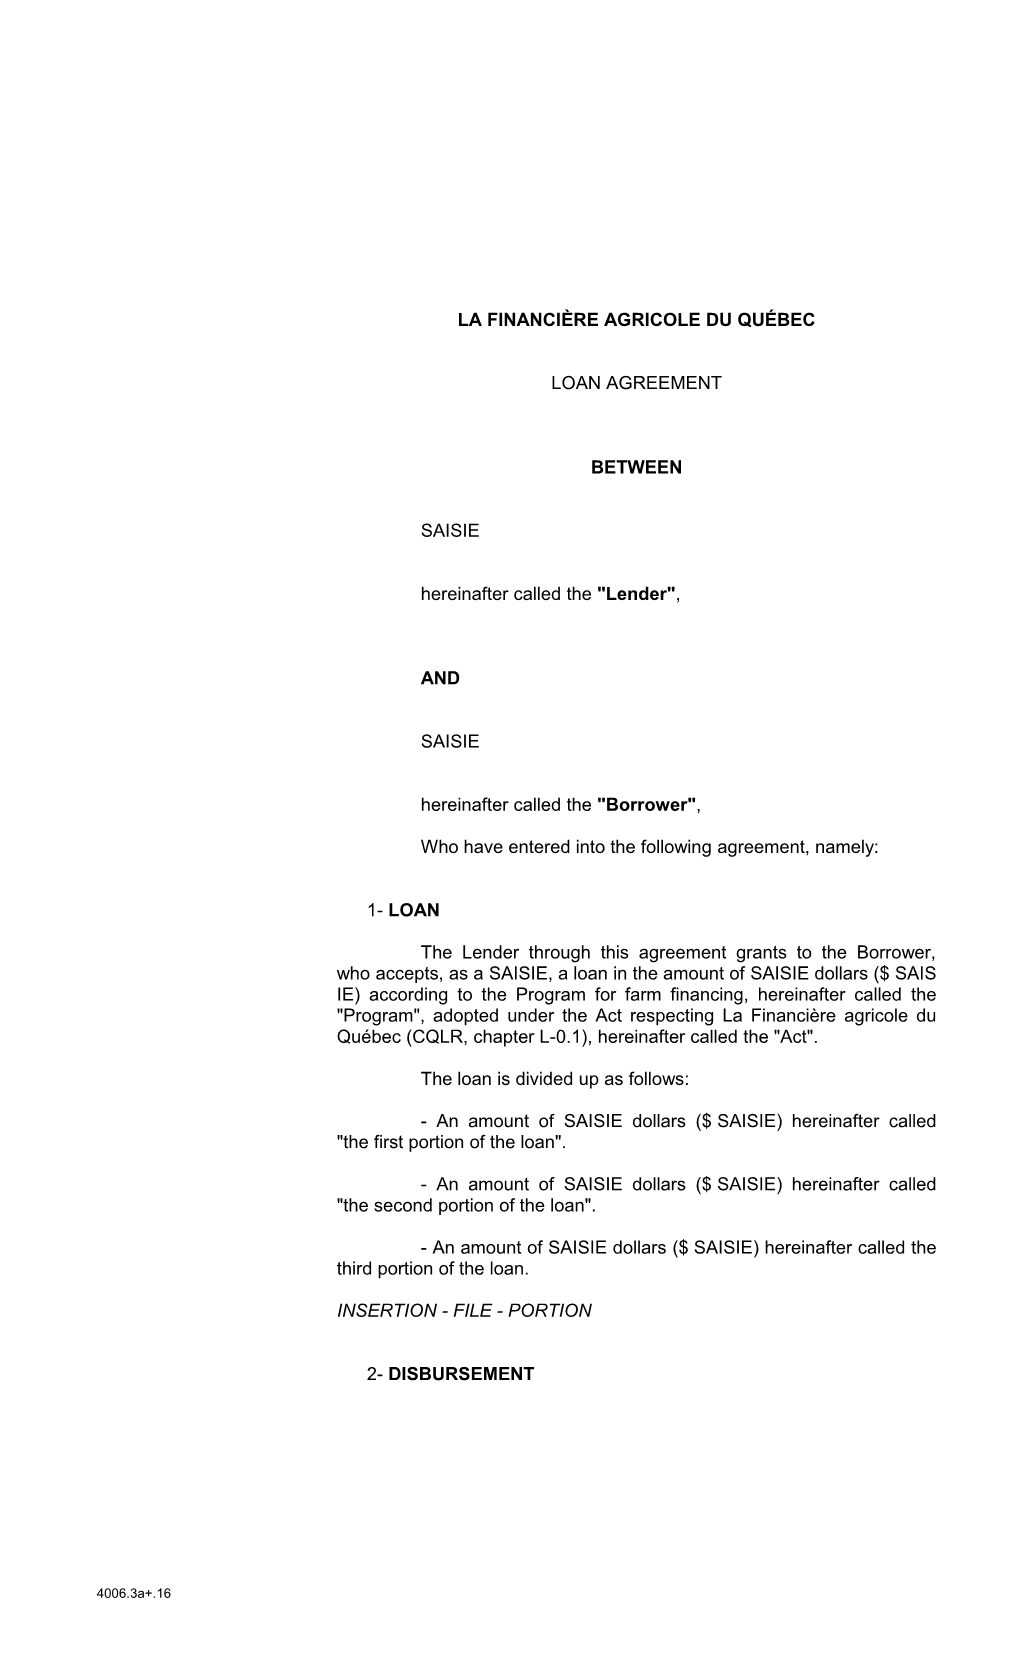 4006.3A+.16 - Private Loan Agreement for 3 Or More Portions, at Least One of Which Is Advantage